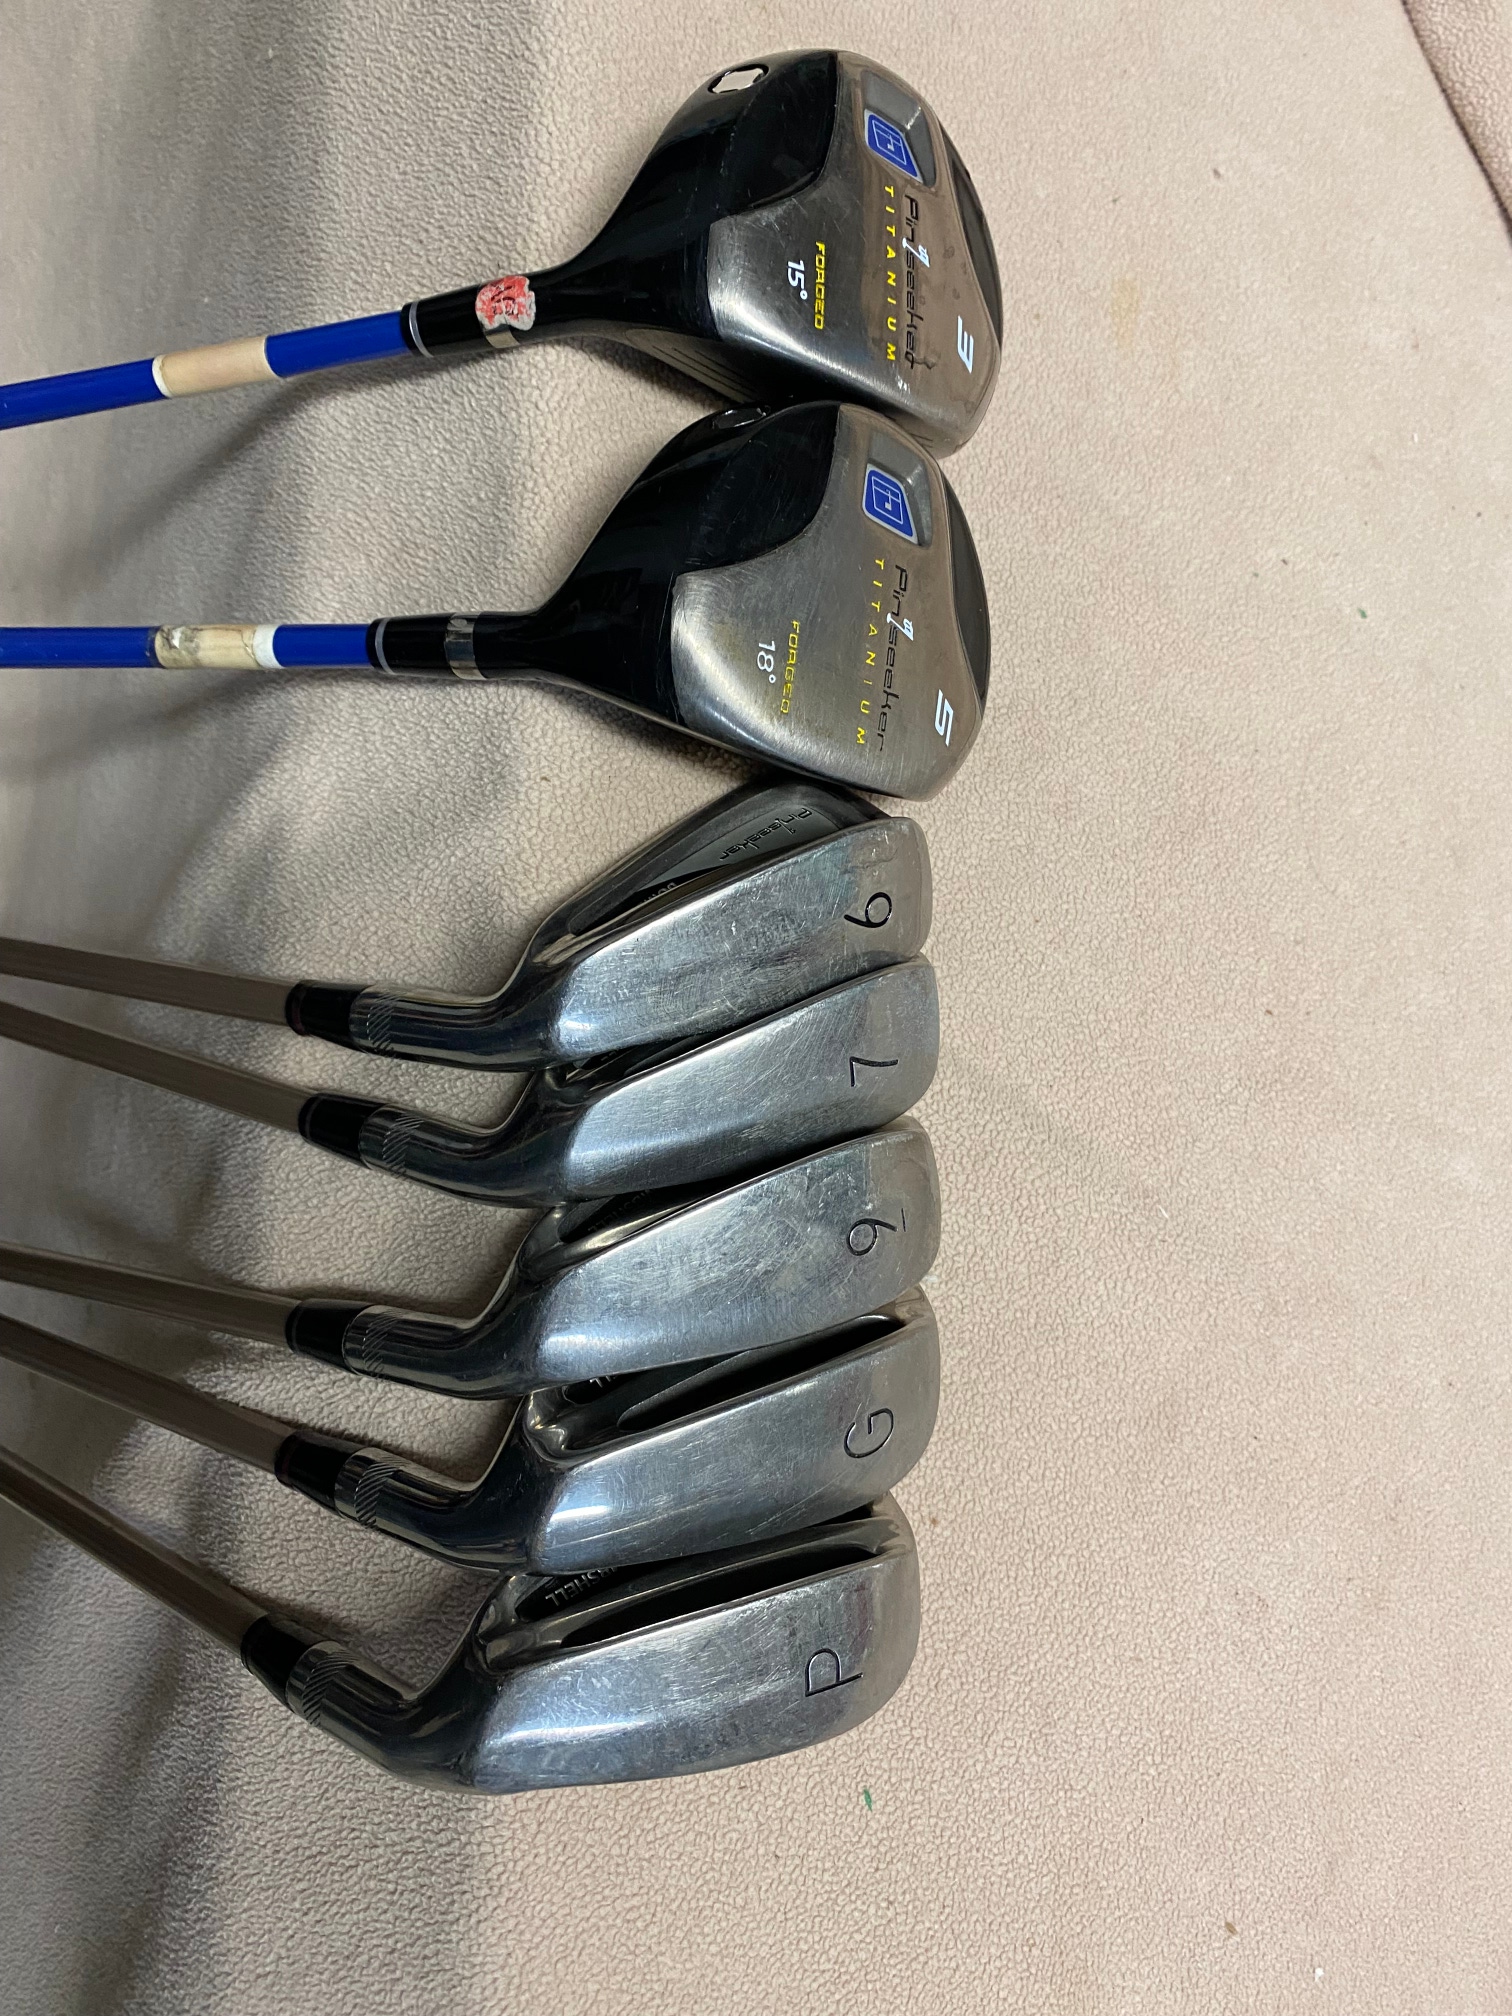 Used Men's Right Handed Pinseeker Bombshell Clubs (Full Set) Uniflex 7 Pieces